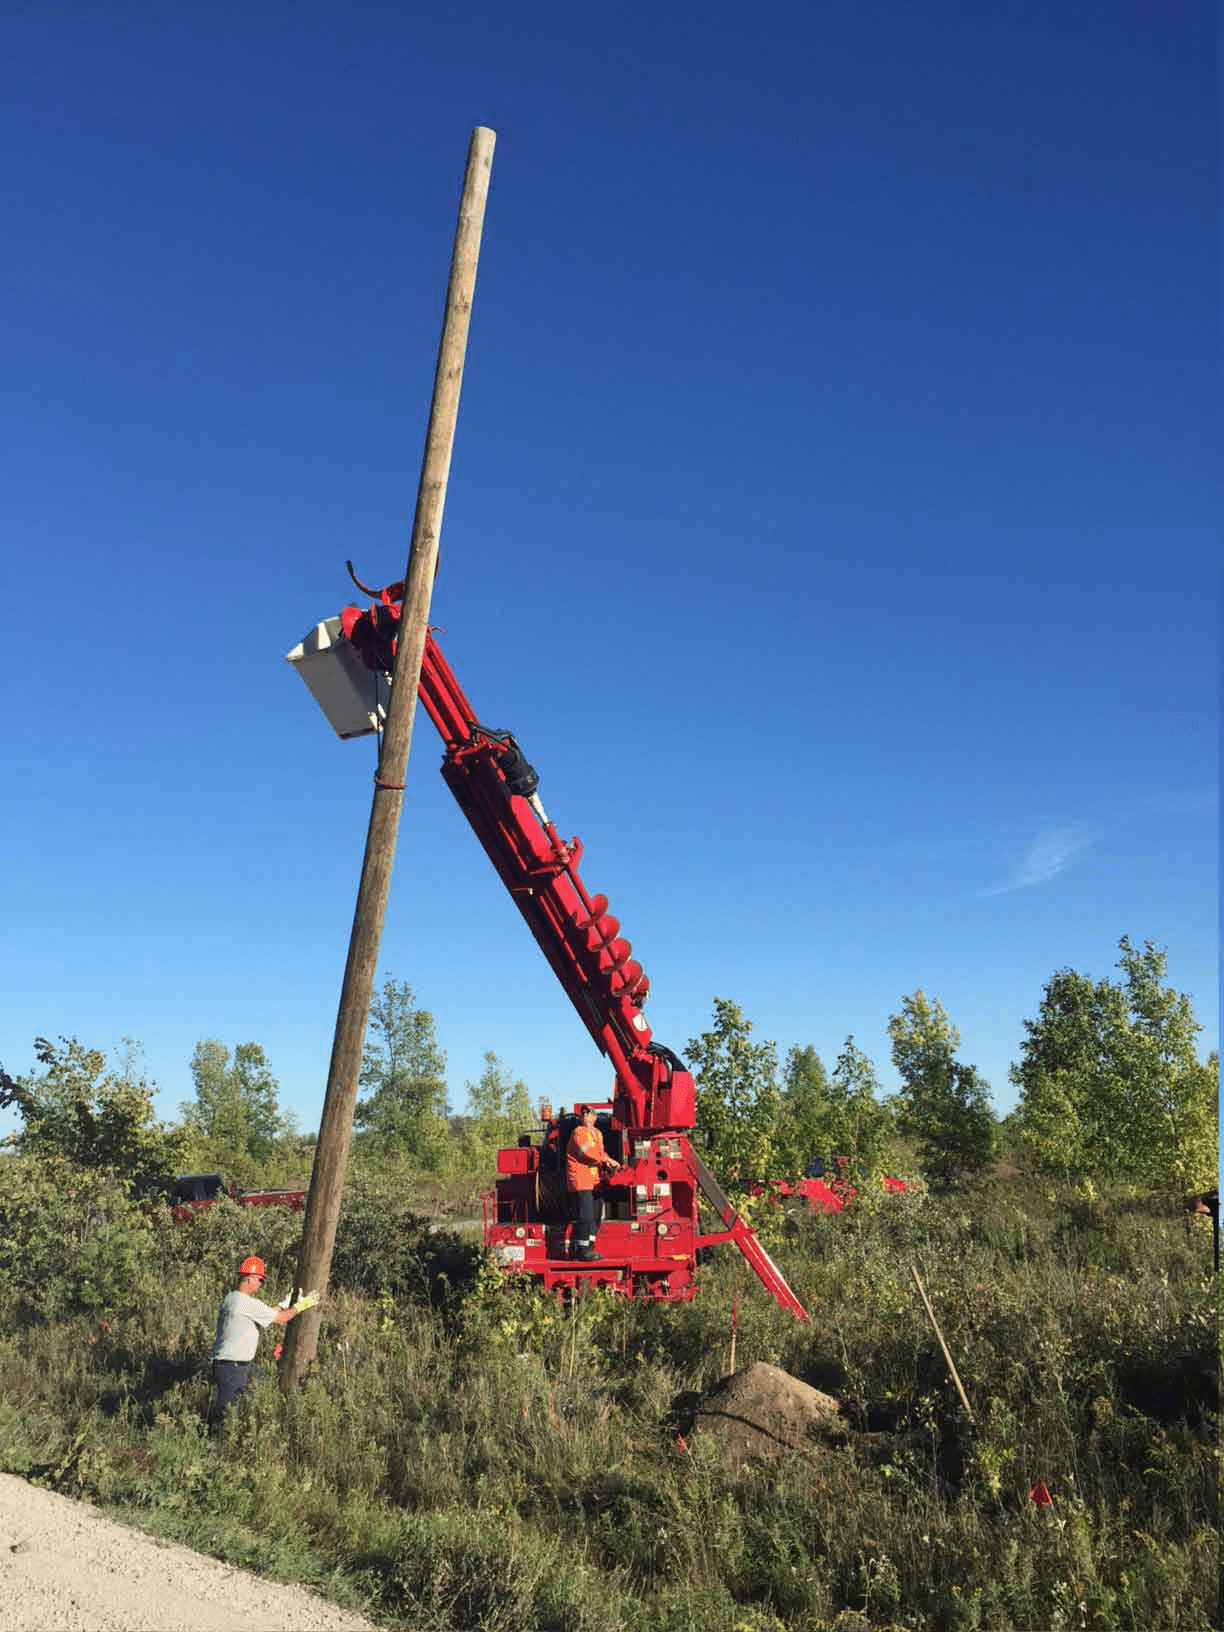 Construction Site Pole being Installed